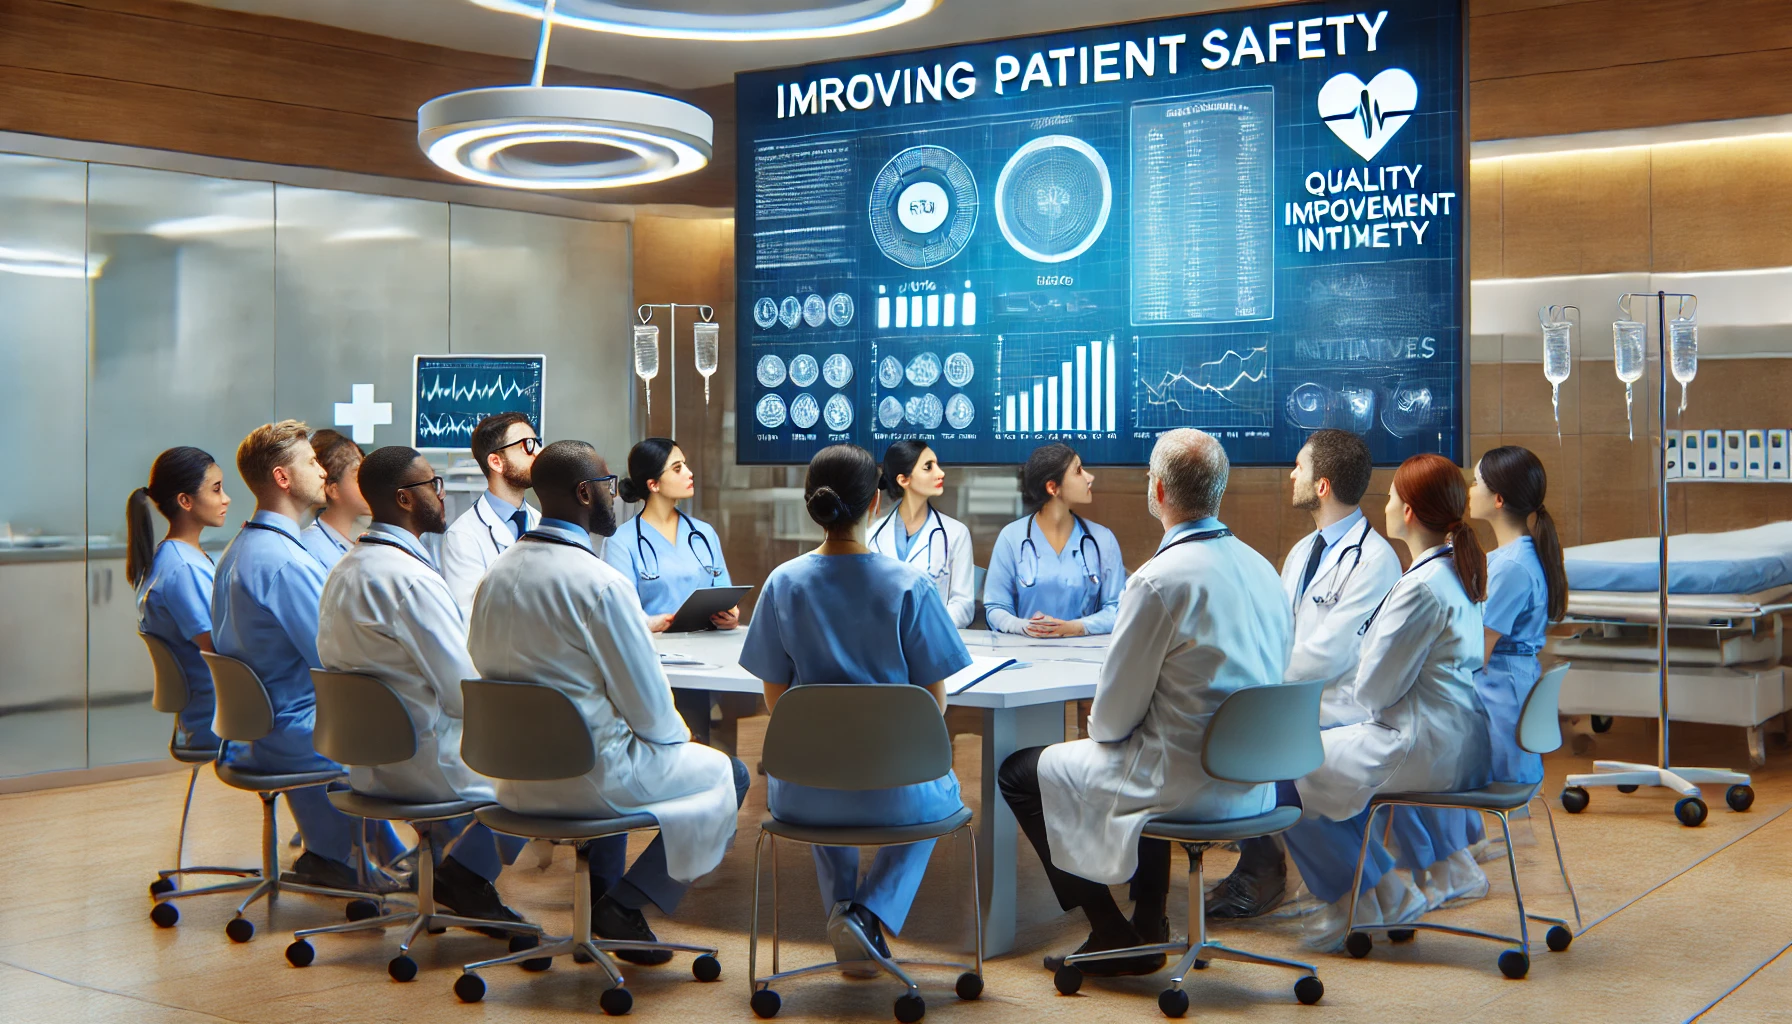 Improving patient safety through quality improvement initiatives